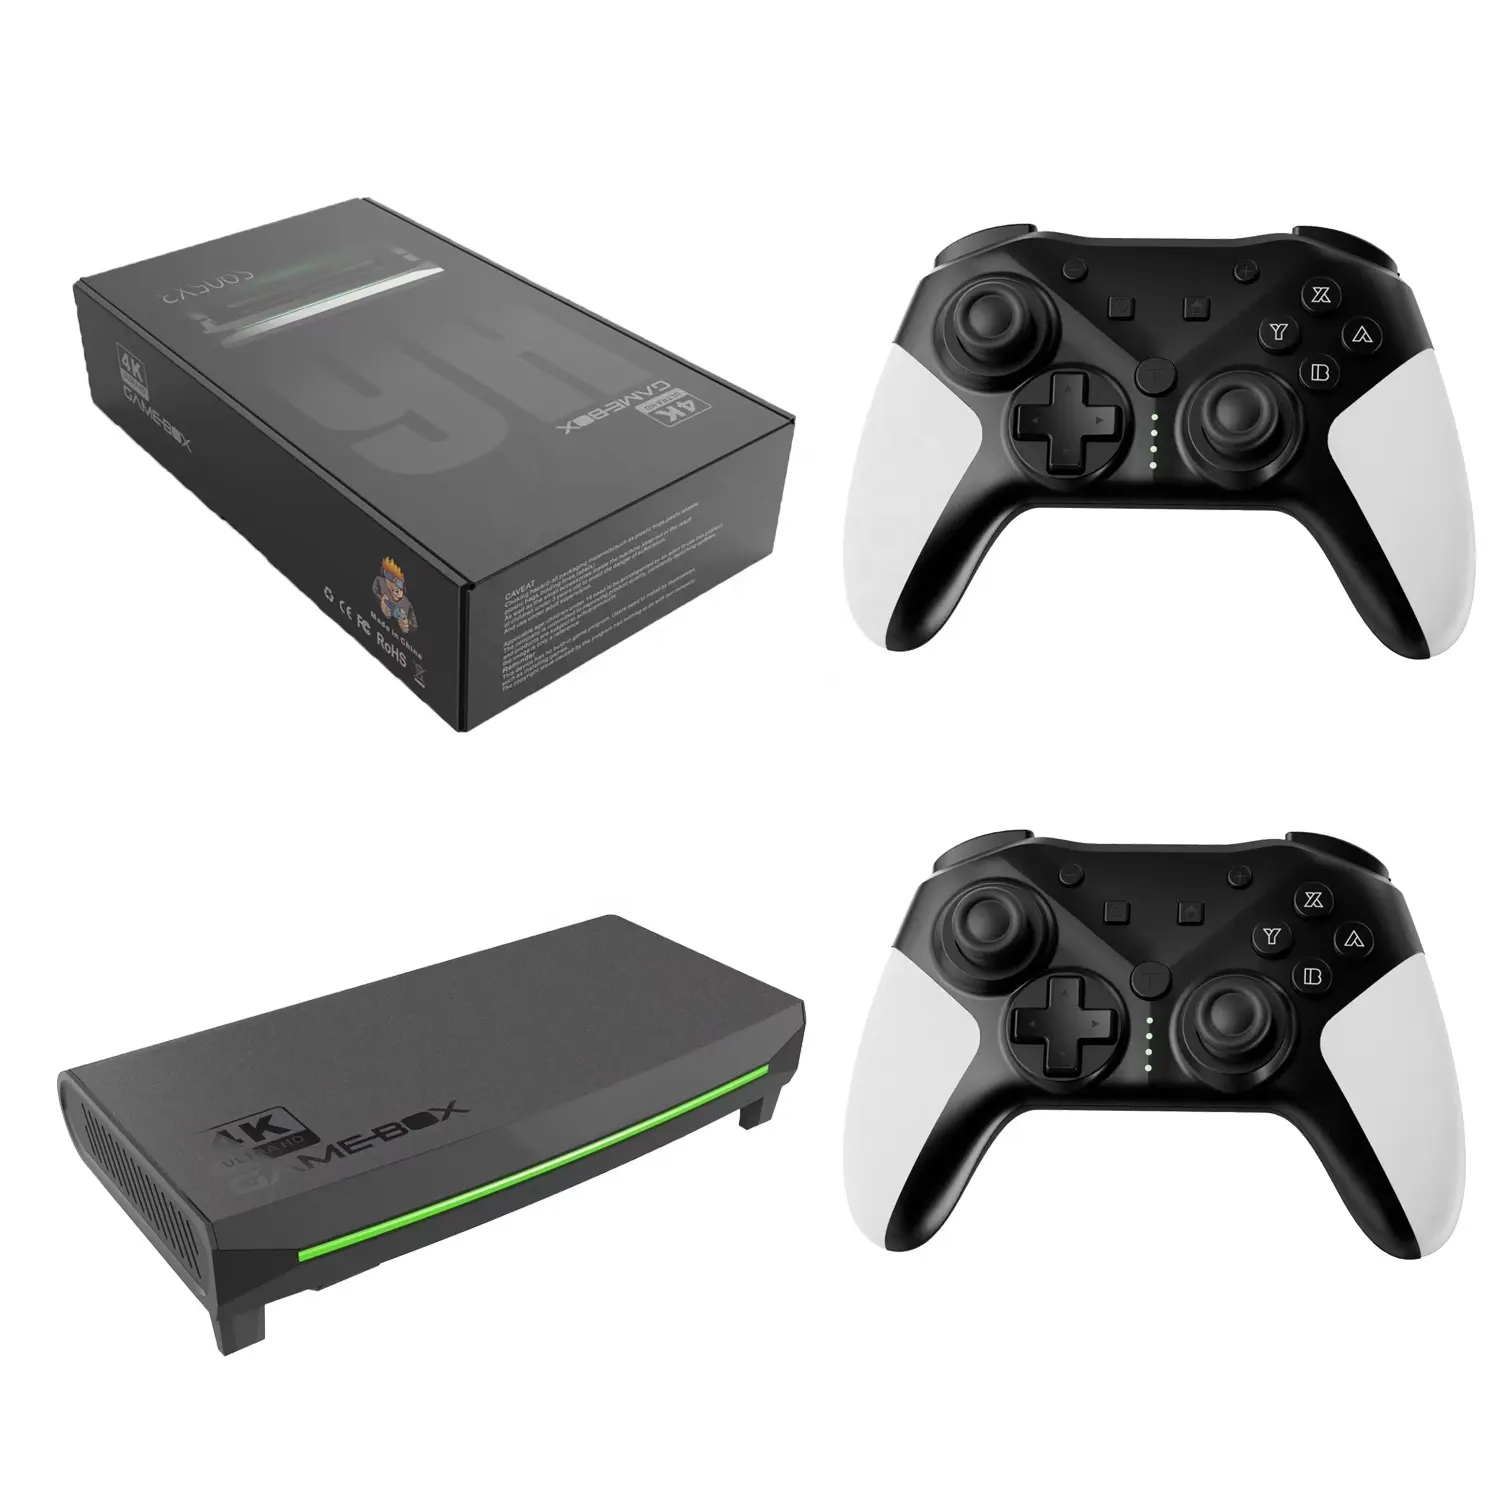 4K Hd H6 Game Box Tv-Uitgang Video Game Console Bedrade Controller Ddriii 256M Met 10000 Games 64bit A55 Architectuur Chip